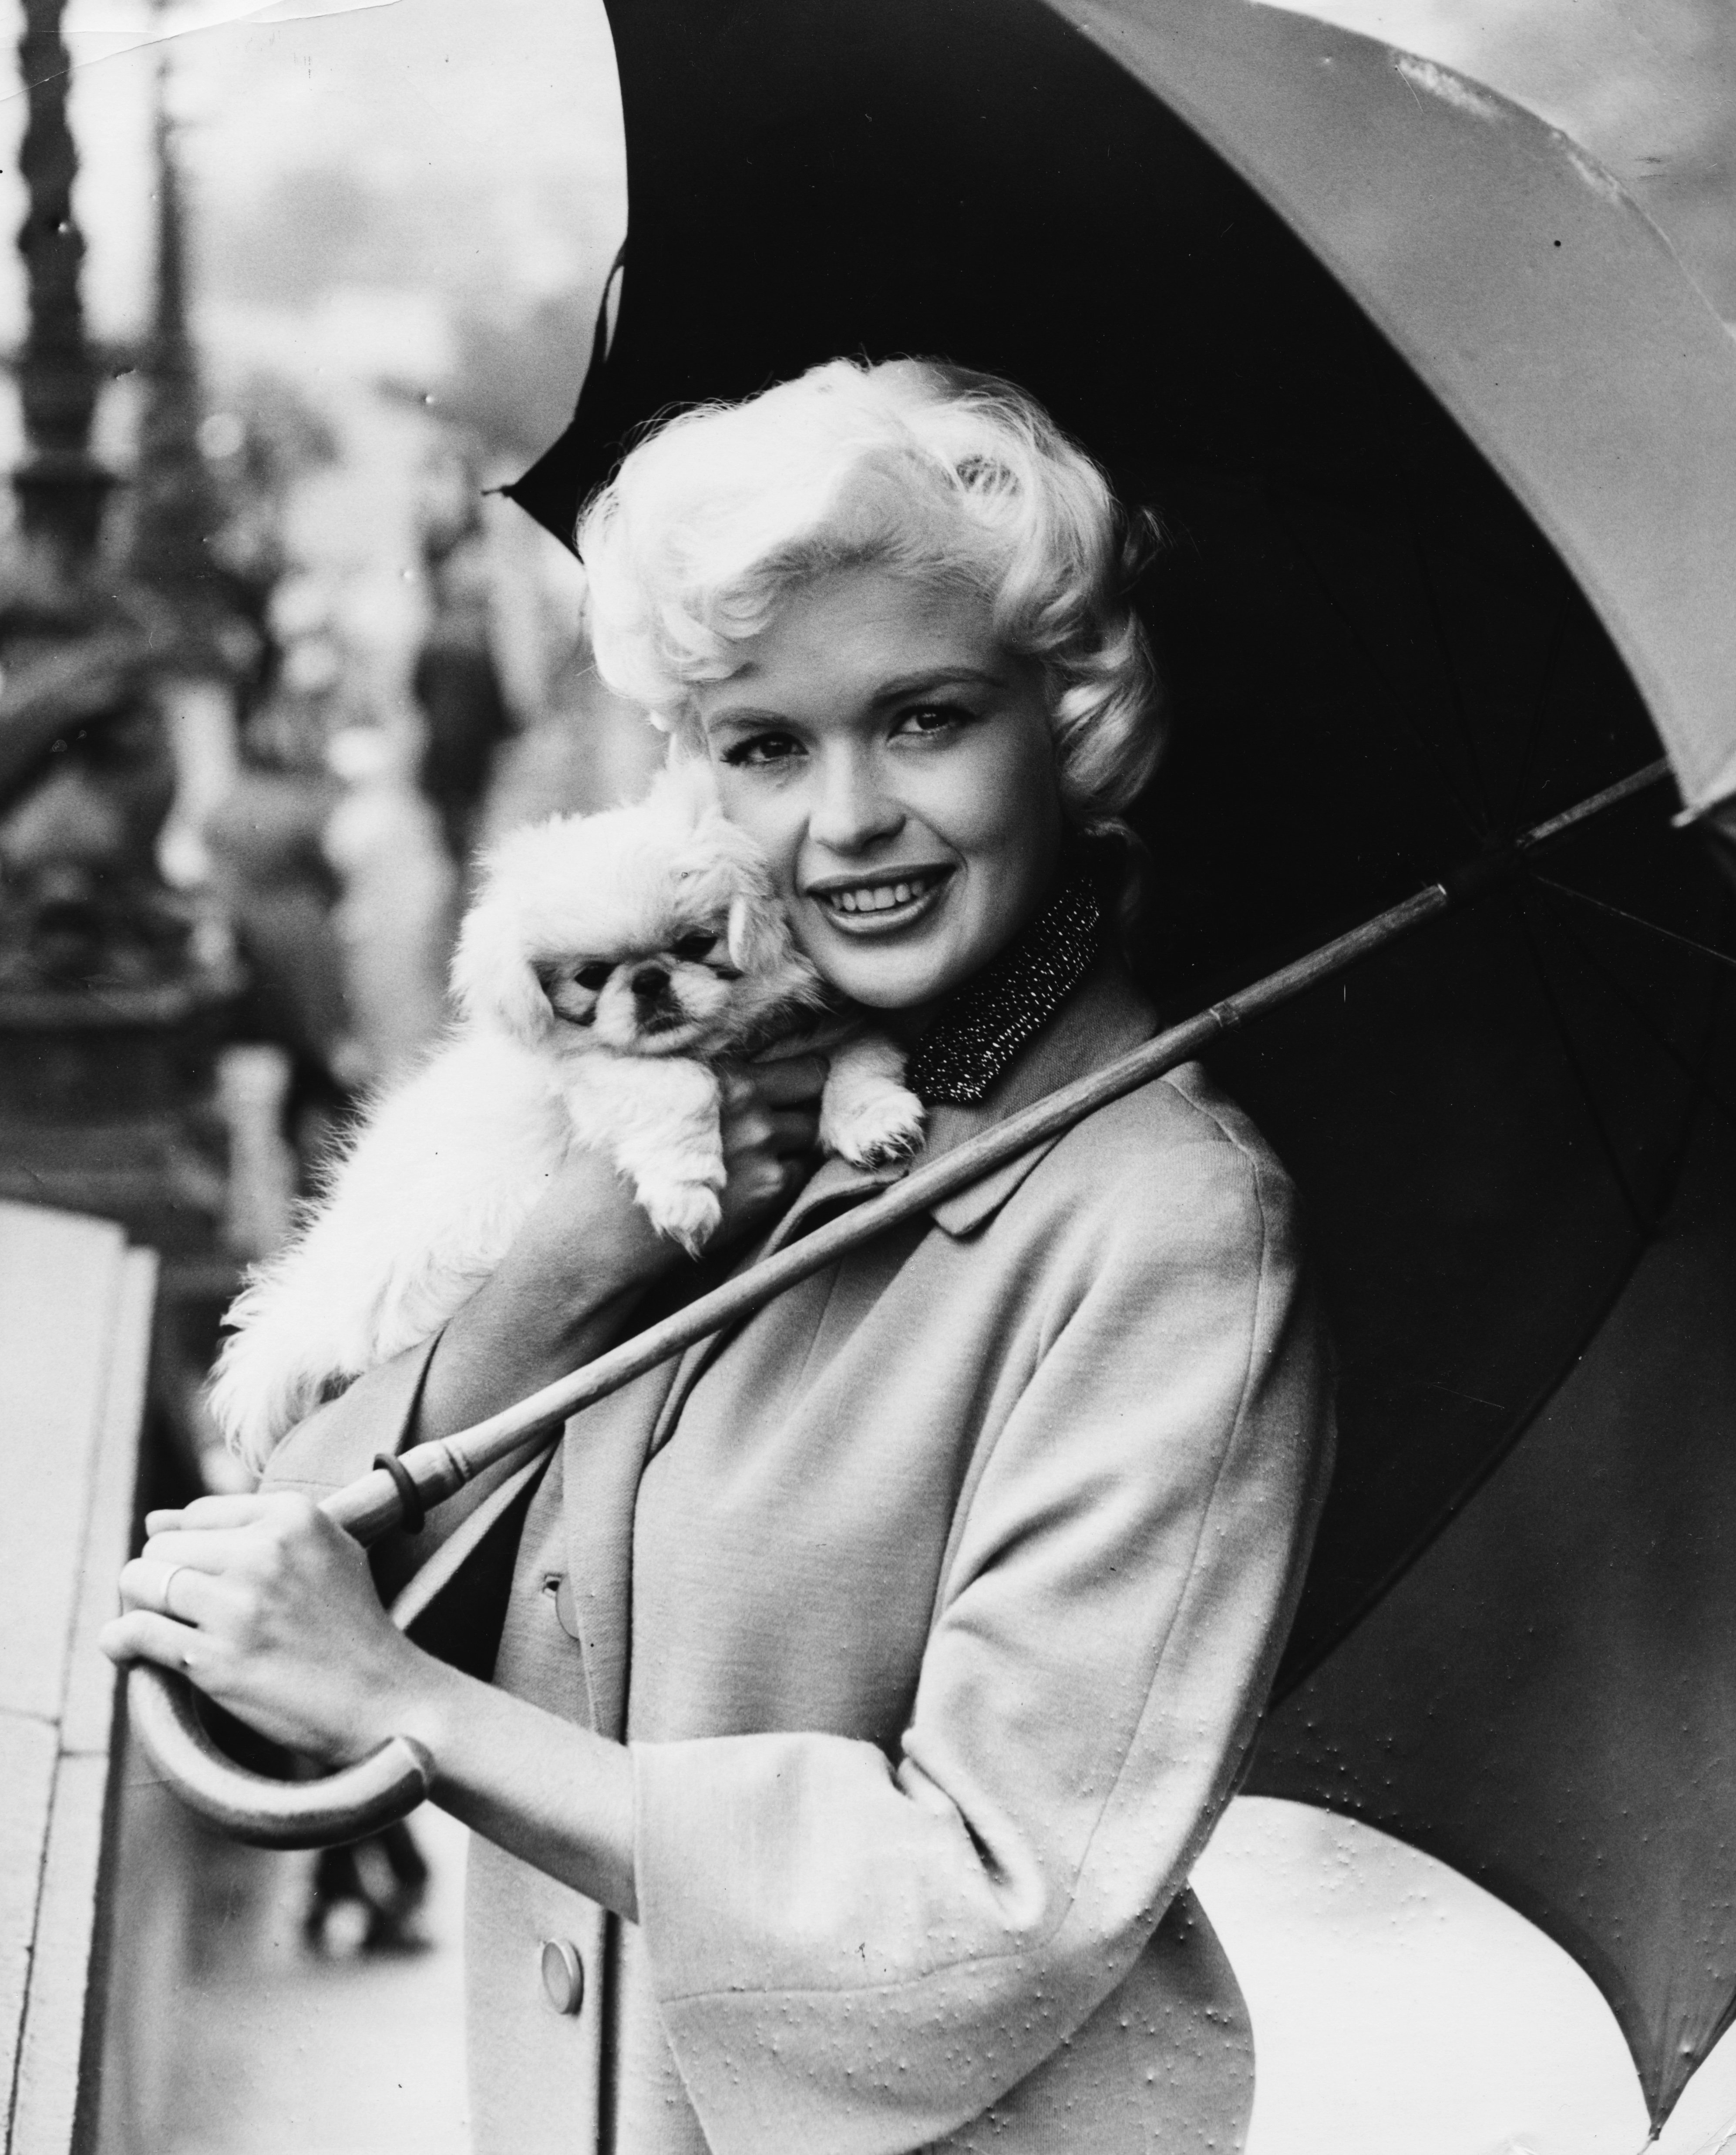 Jayne Mansfield on the set of the film “Too Hot to Handle” in England on August 10th 1959 | Source: Getty Images